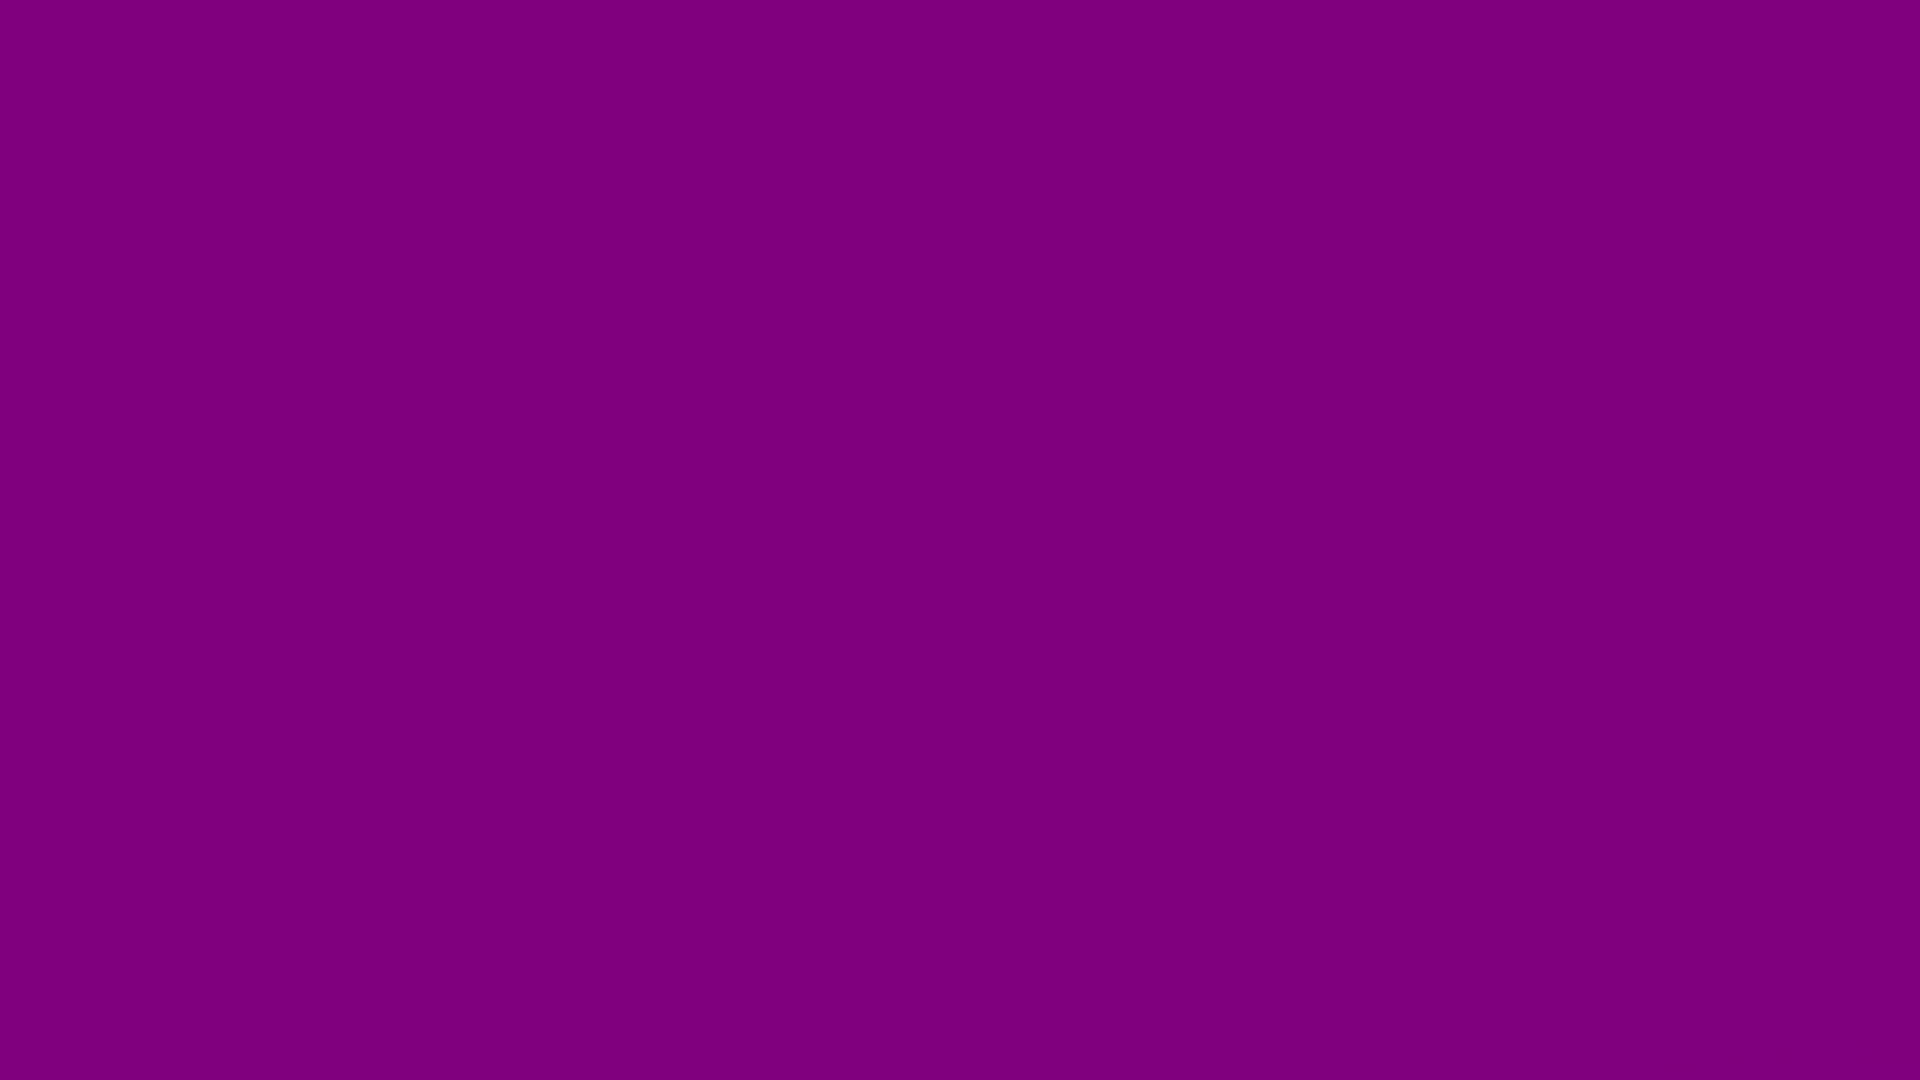 Rich and vibrant hues of solid purple. Wallpaper